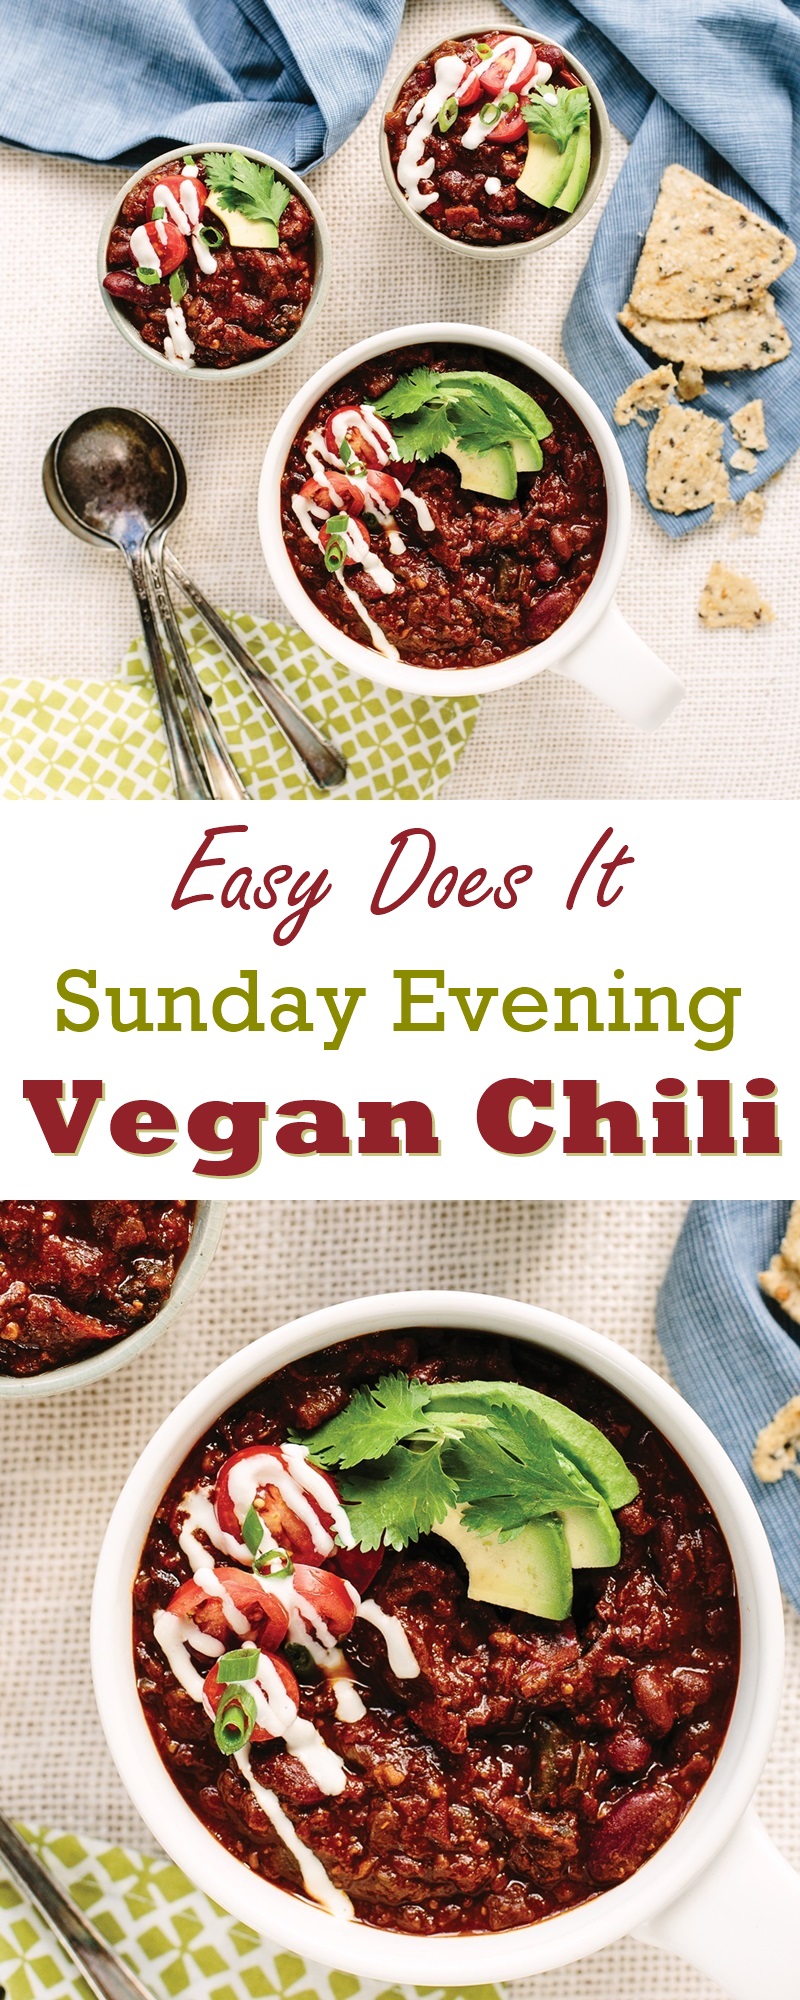 Easy Does It Sunday Night Vegan Chili Recipe from Blissful Basil (gluten-free + nut-free and soy-free options)